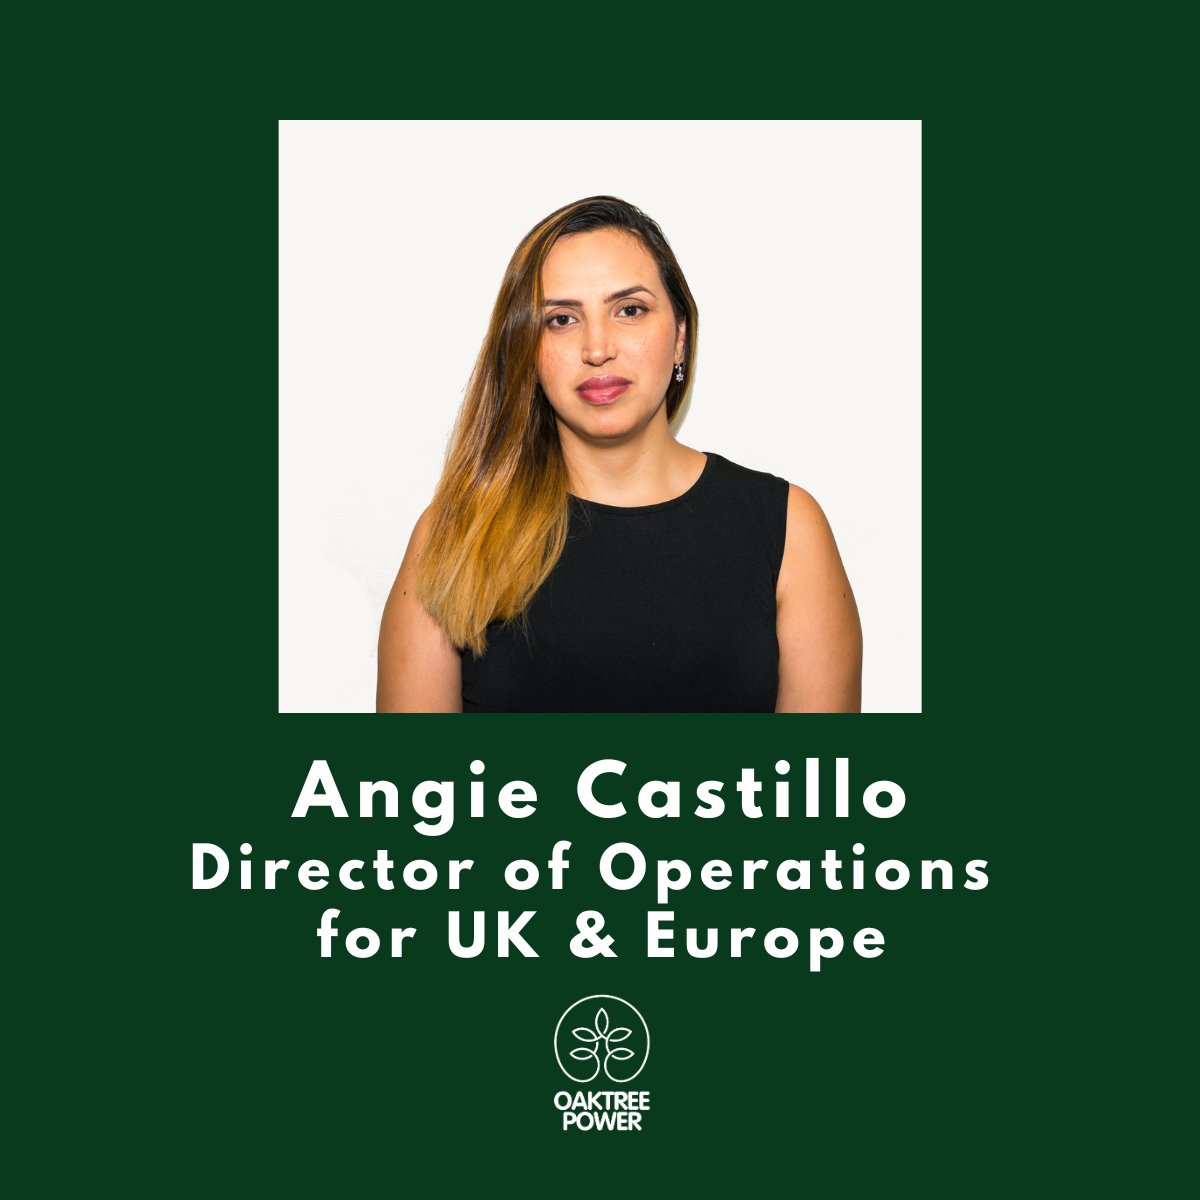 🌟 Week 7 of Team Showcases! 🚀 Meet Angie Castillo, our powerhouse Director of Operations for UK & Europe at OakTree Power. Explore the operational brilliance driving our success! #TeamSpotlight #OakTreePower #MeetTheTeam 💼🌍